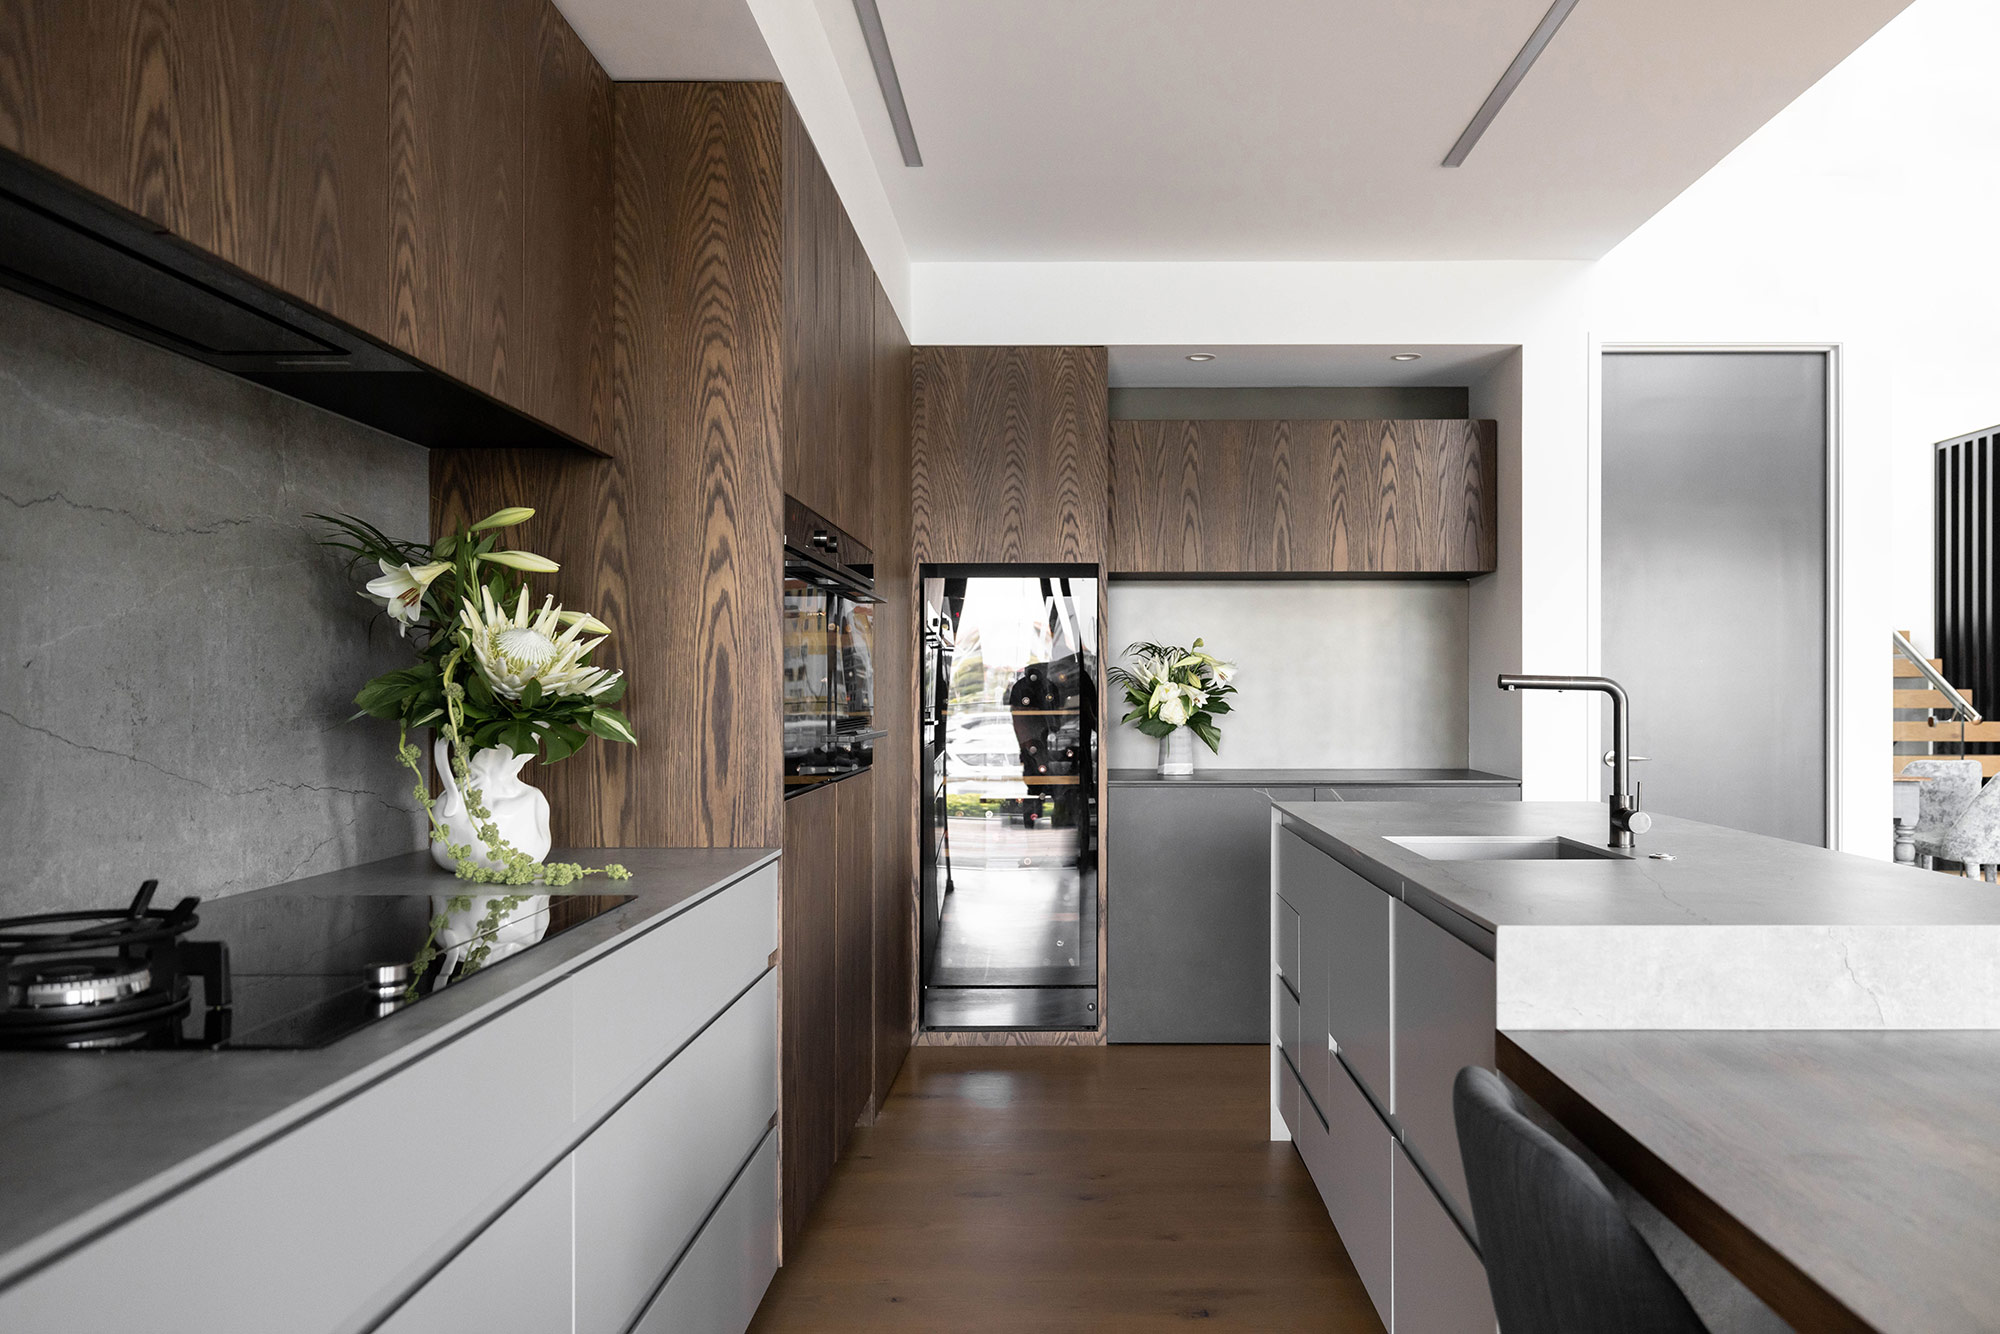 Image of Gulf Harbour 18 in Two Dekton colours to match wood in kitchens and bathrooms - Cosentino